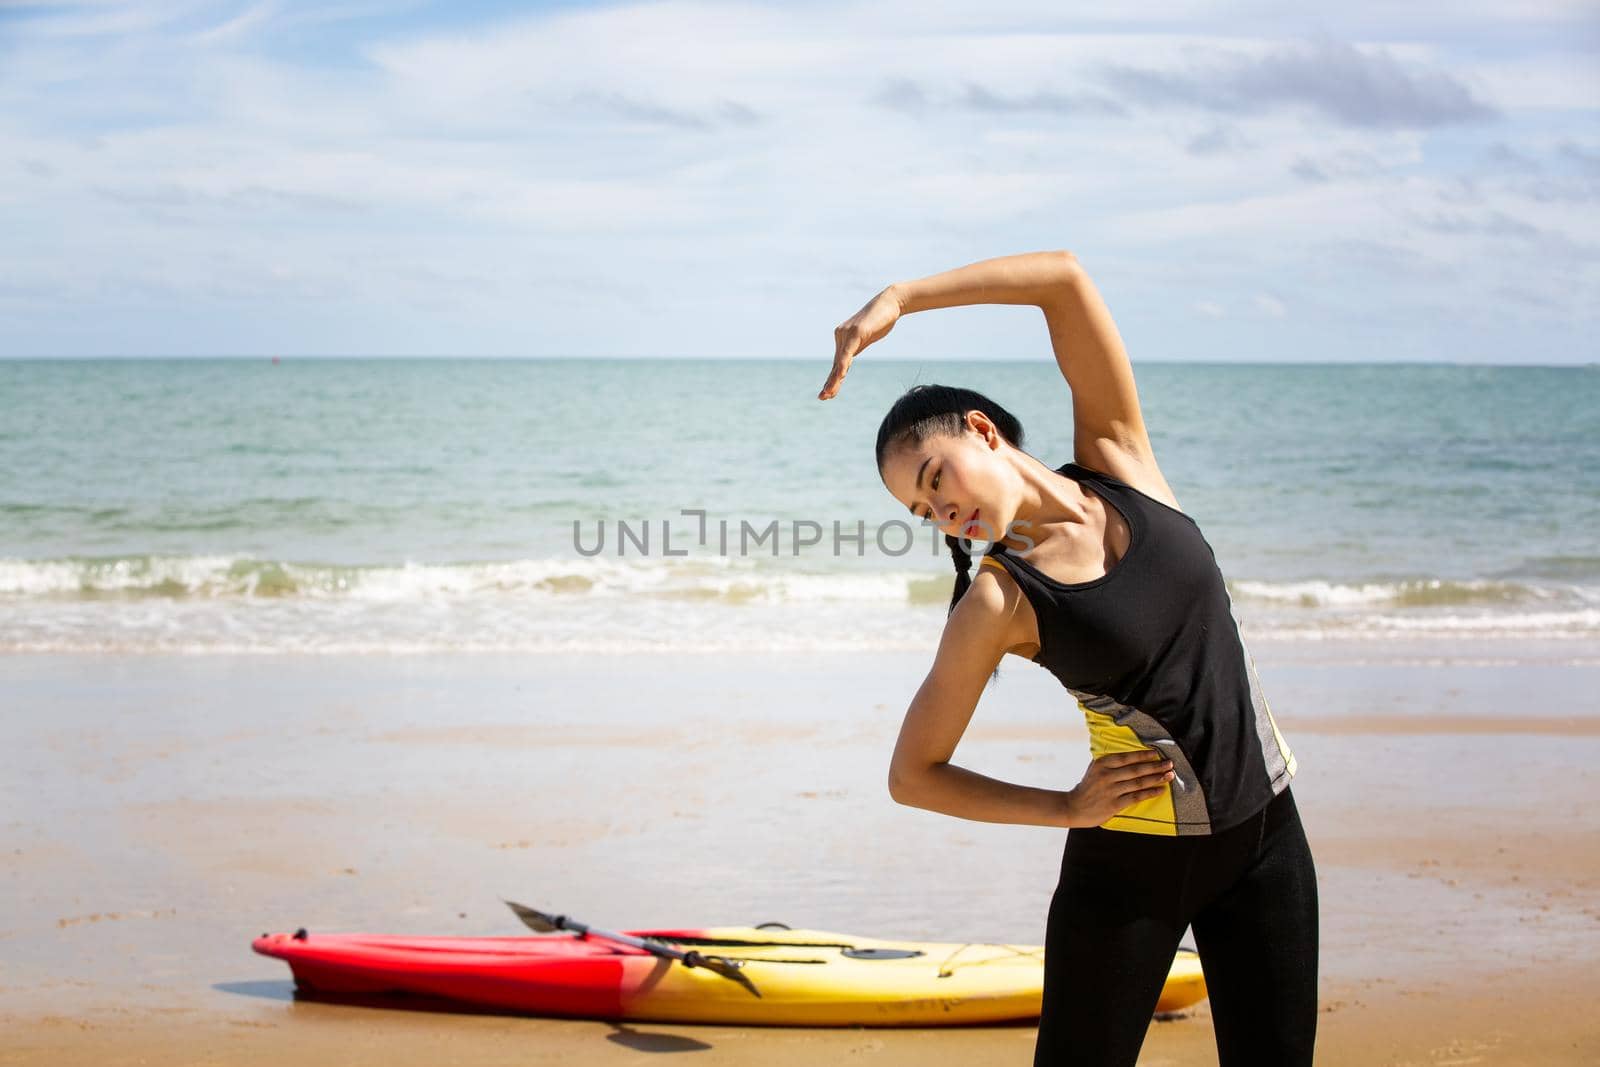 Woman on stand up paddle board. Having fun during warm summer beach vacation holiday, active woman by chuanchai